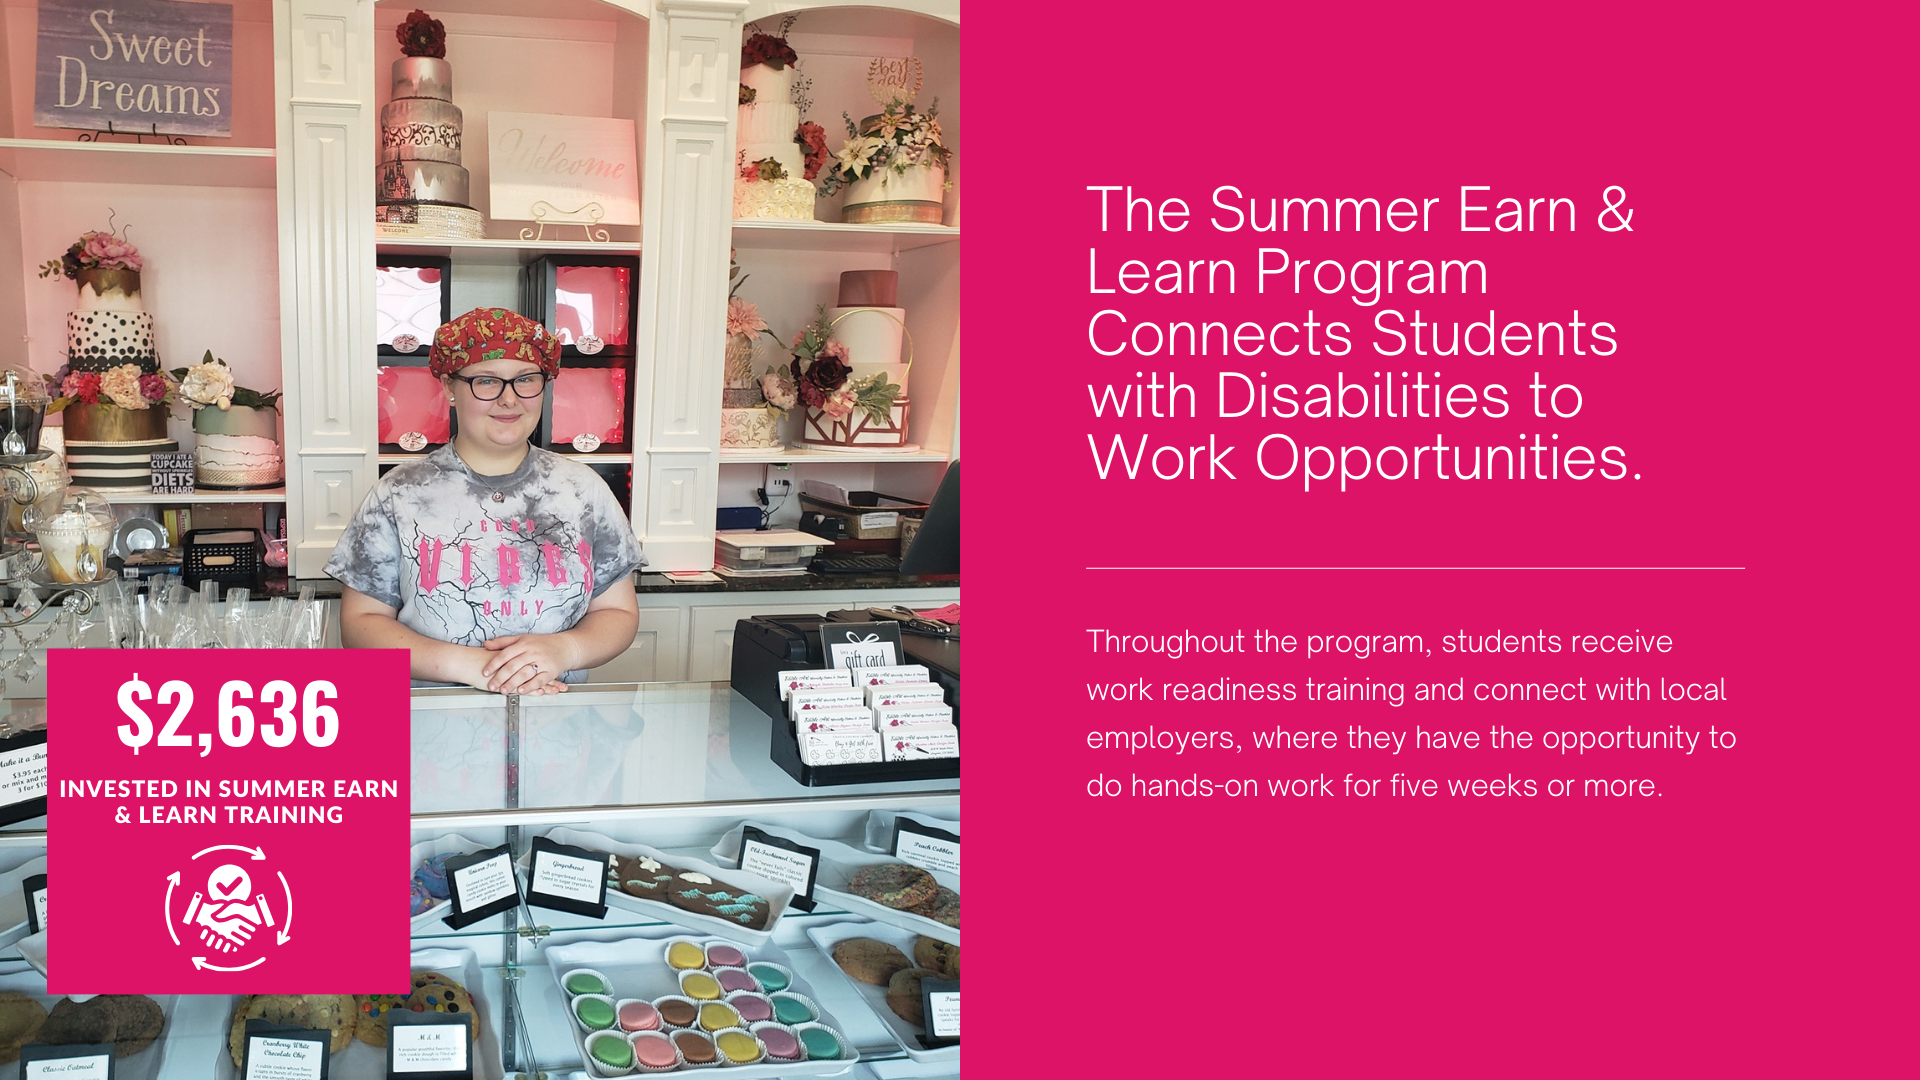 The summer earn and learn program connects students with disabilities to work opportunities